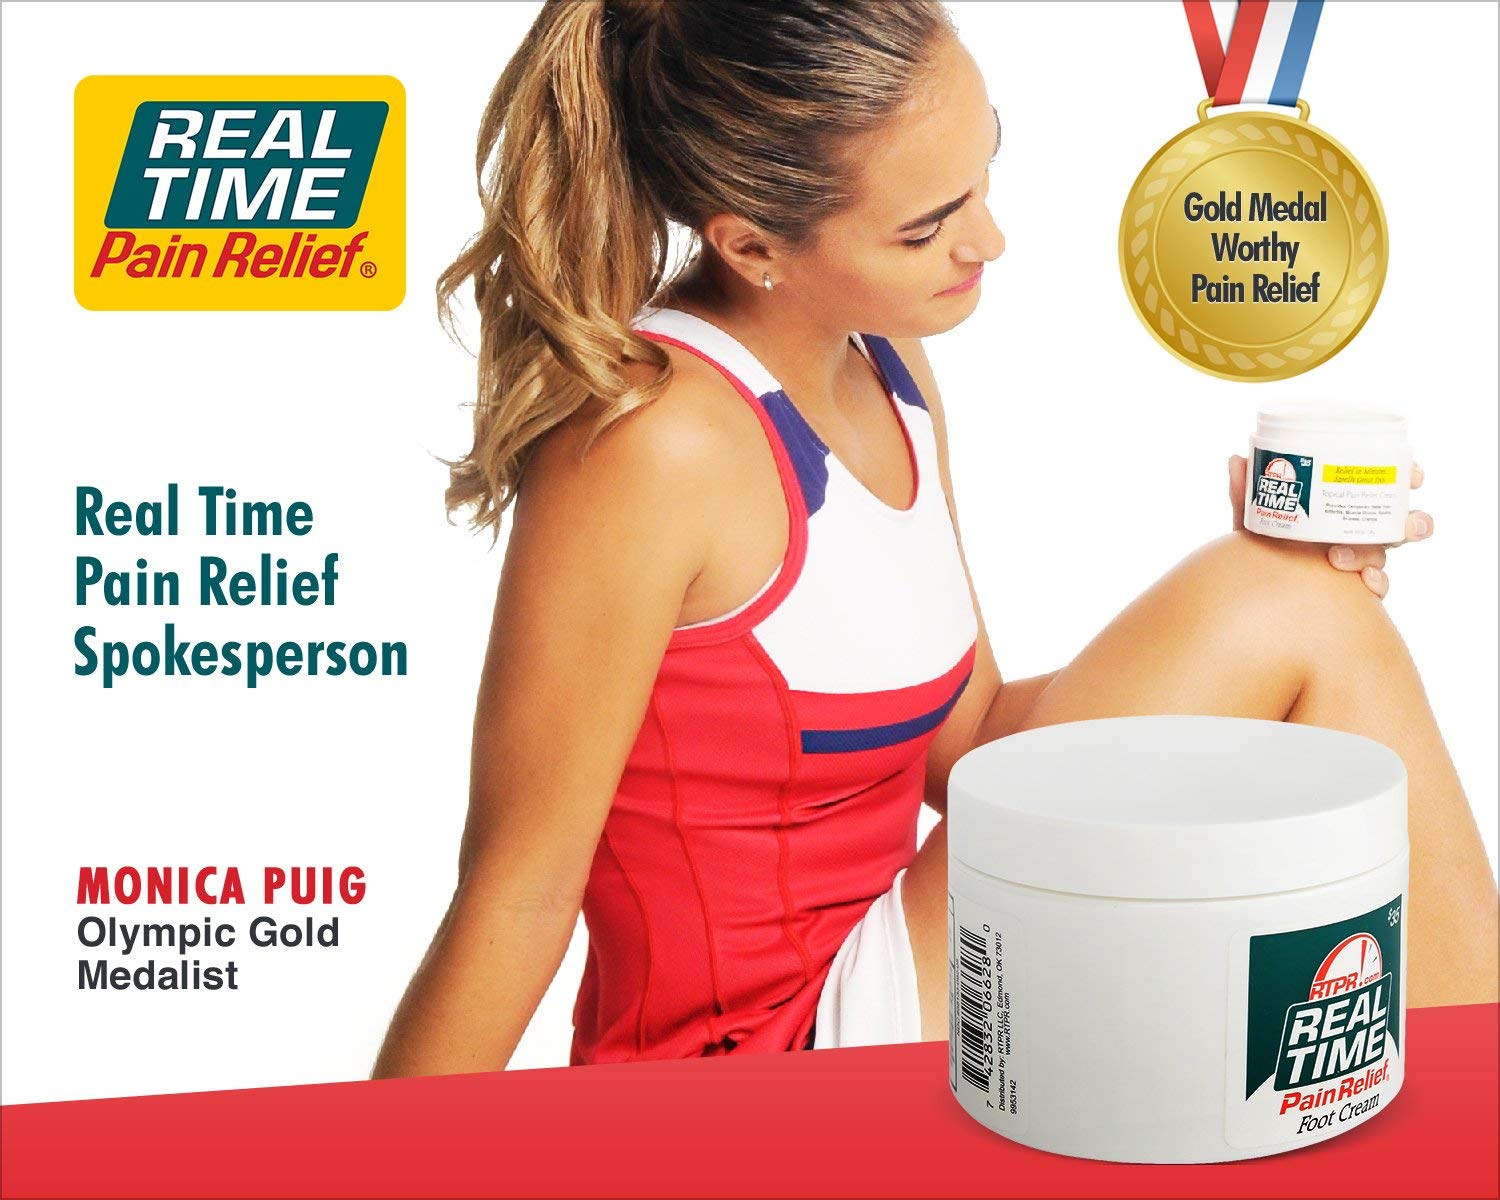 Real Time Pain Relief - Foot Cream 11